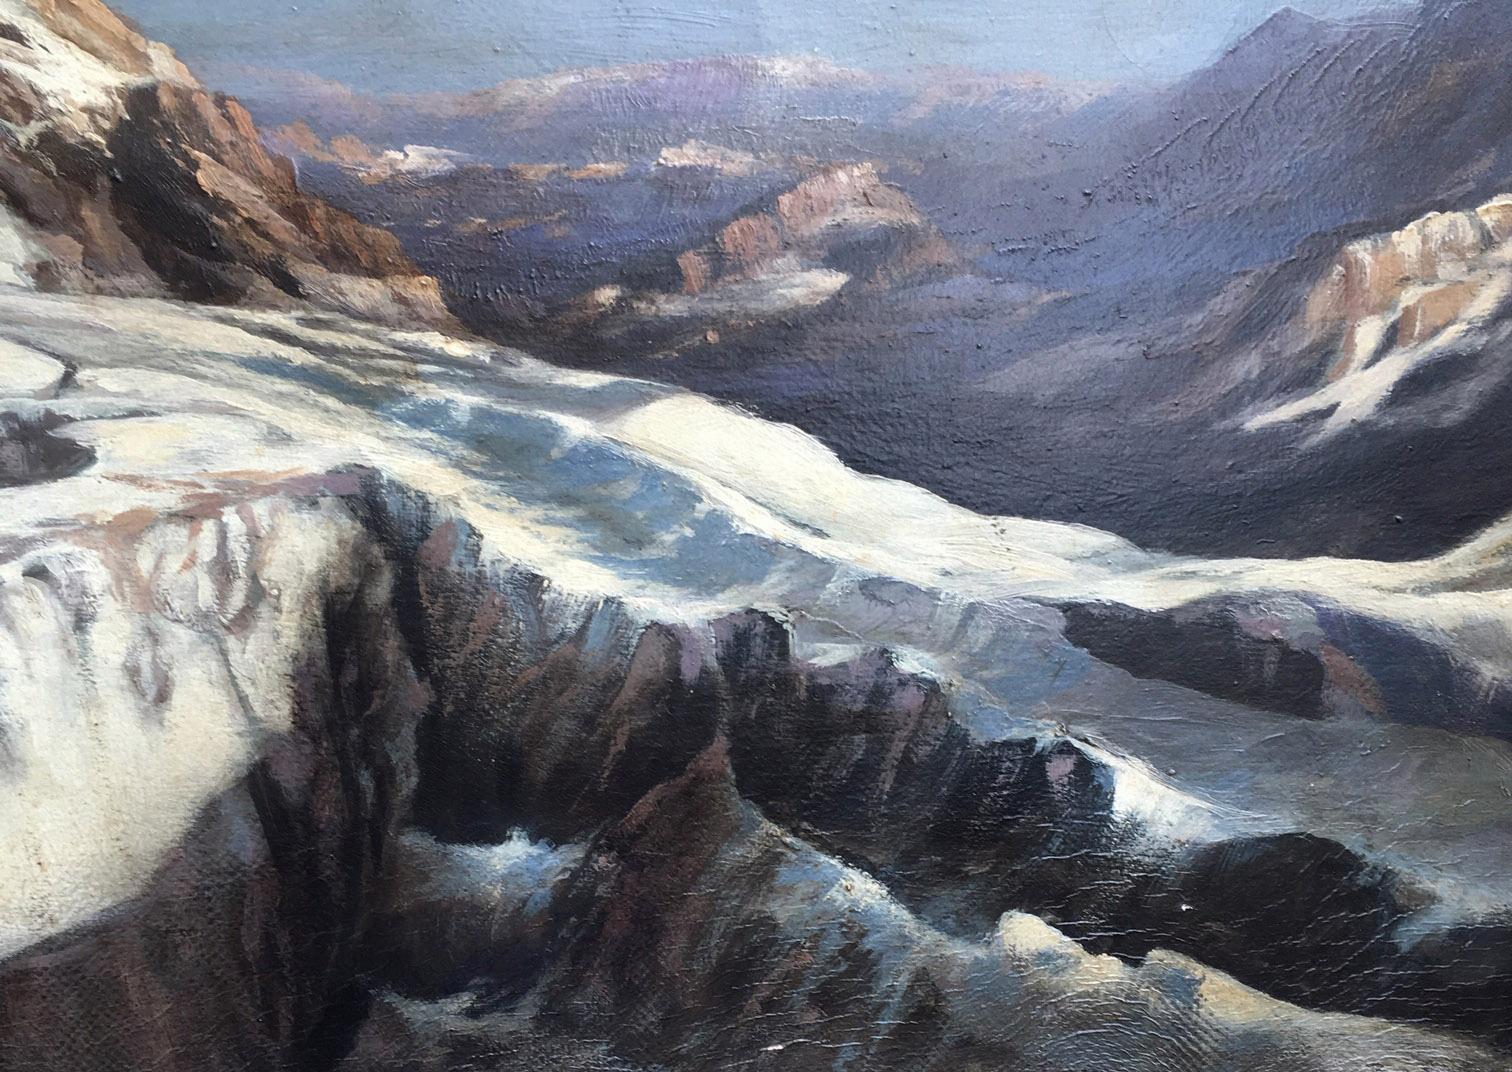 Winter Landscape - Oil on canvas cm. 60x120 by Paolo De Robertis, Italy 2002.  

Beautiful oil on canvas inspired by the work “Glacier in the Spitzbergen” by the artist Friederich Kallomorgen, German impressionist painter and teacher of painting at